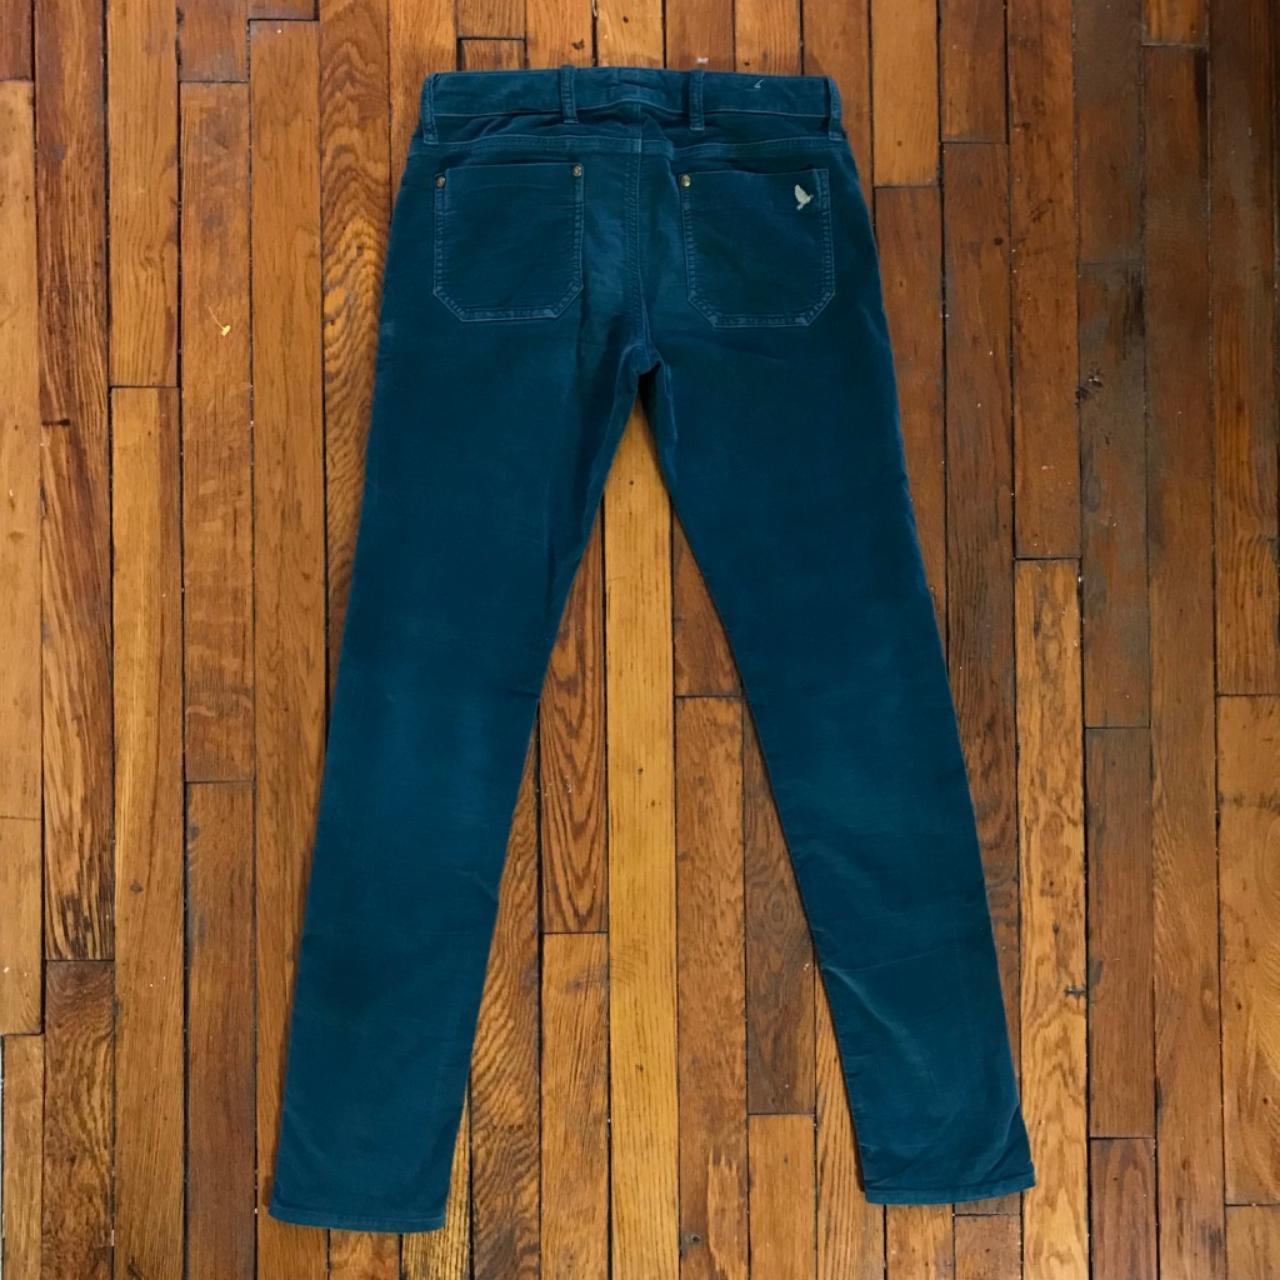 MiH Women's Green and Blue Jeans (3)